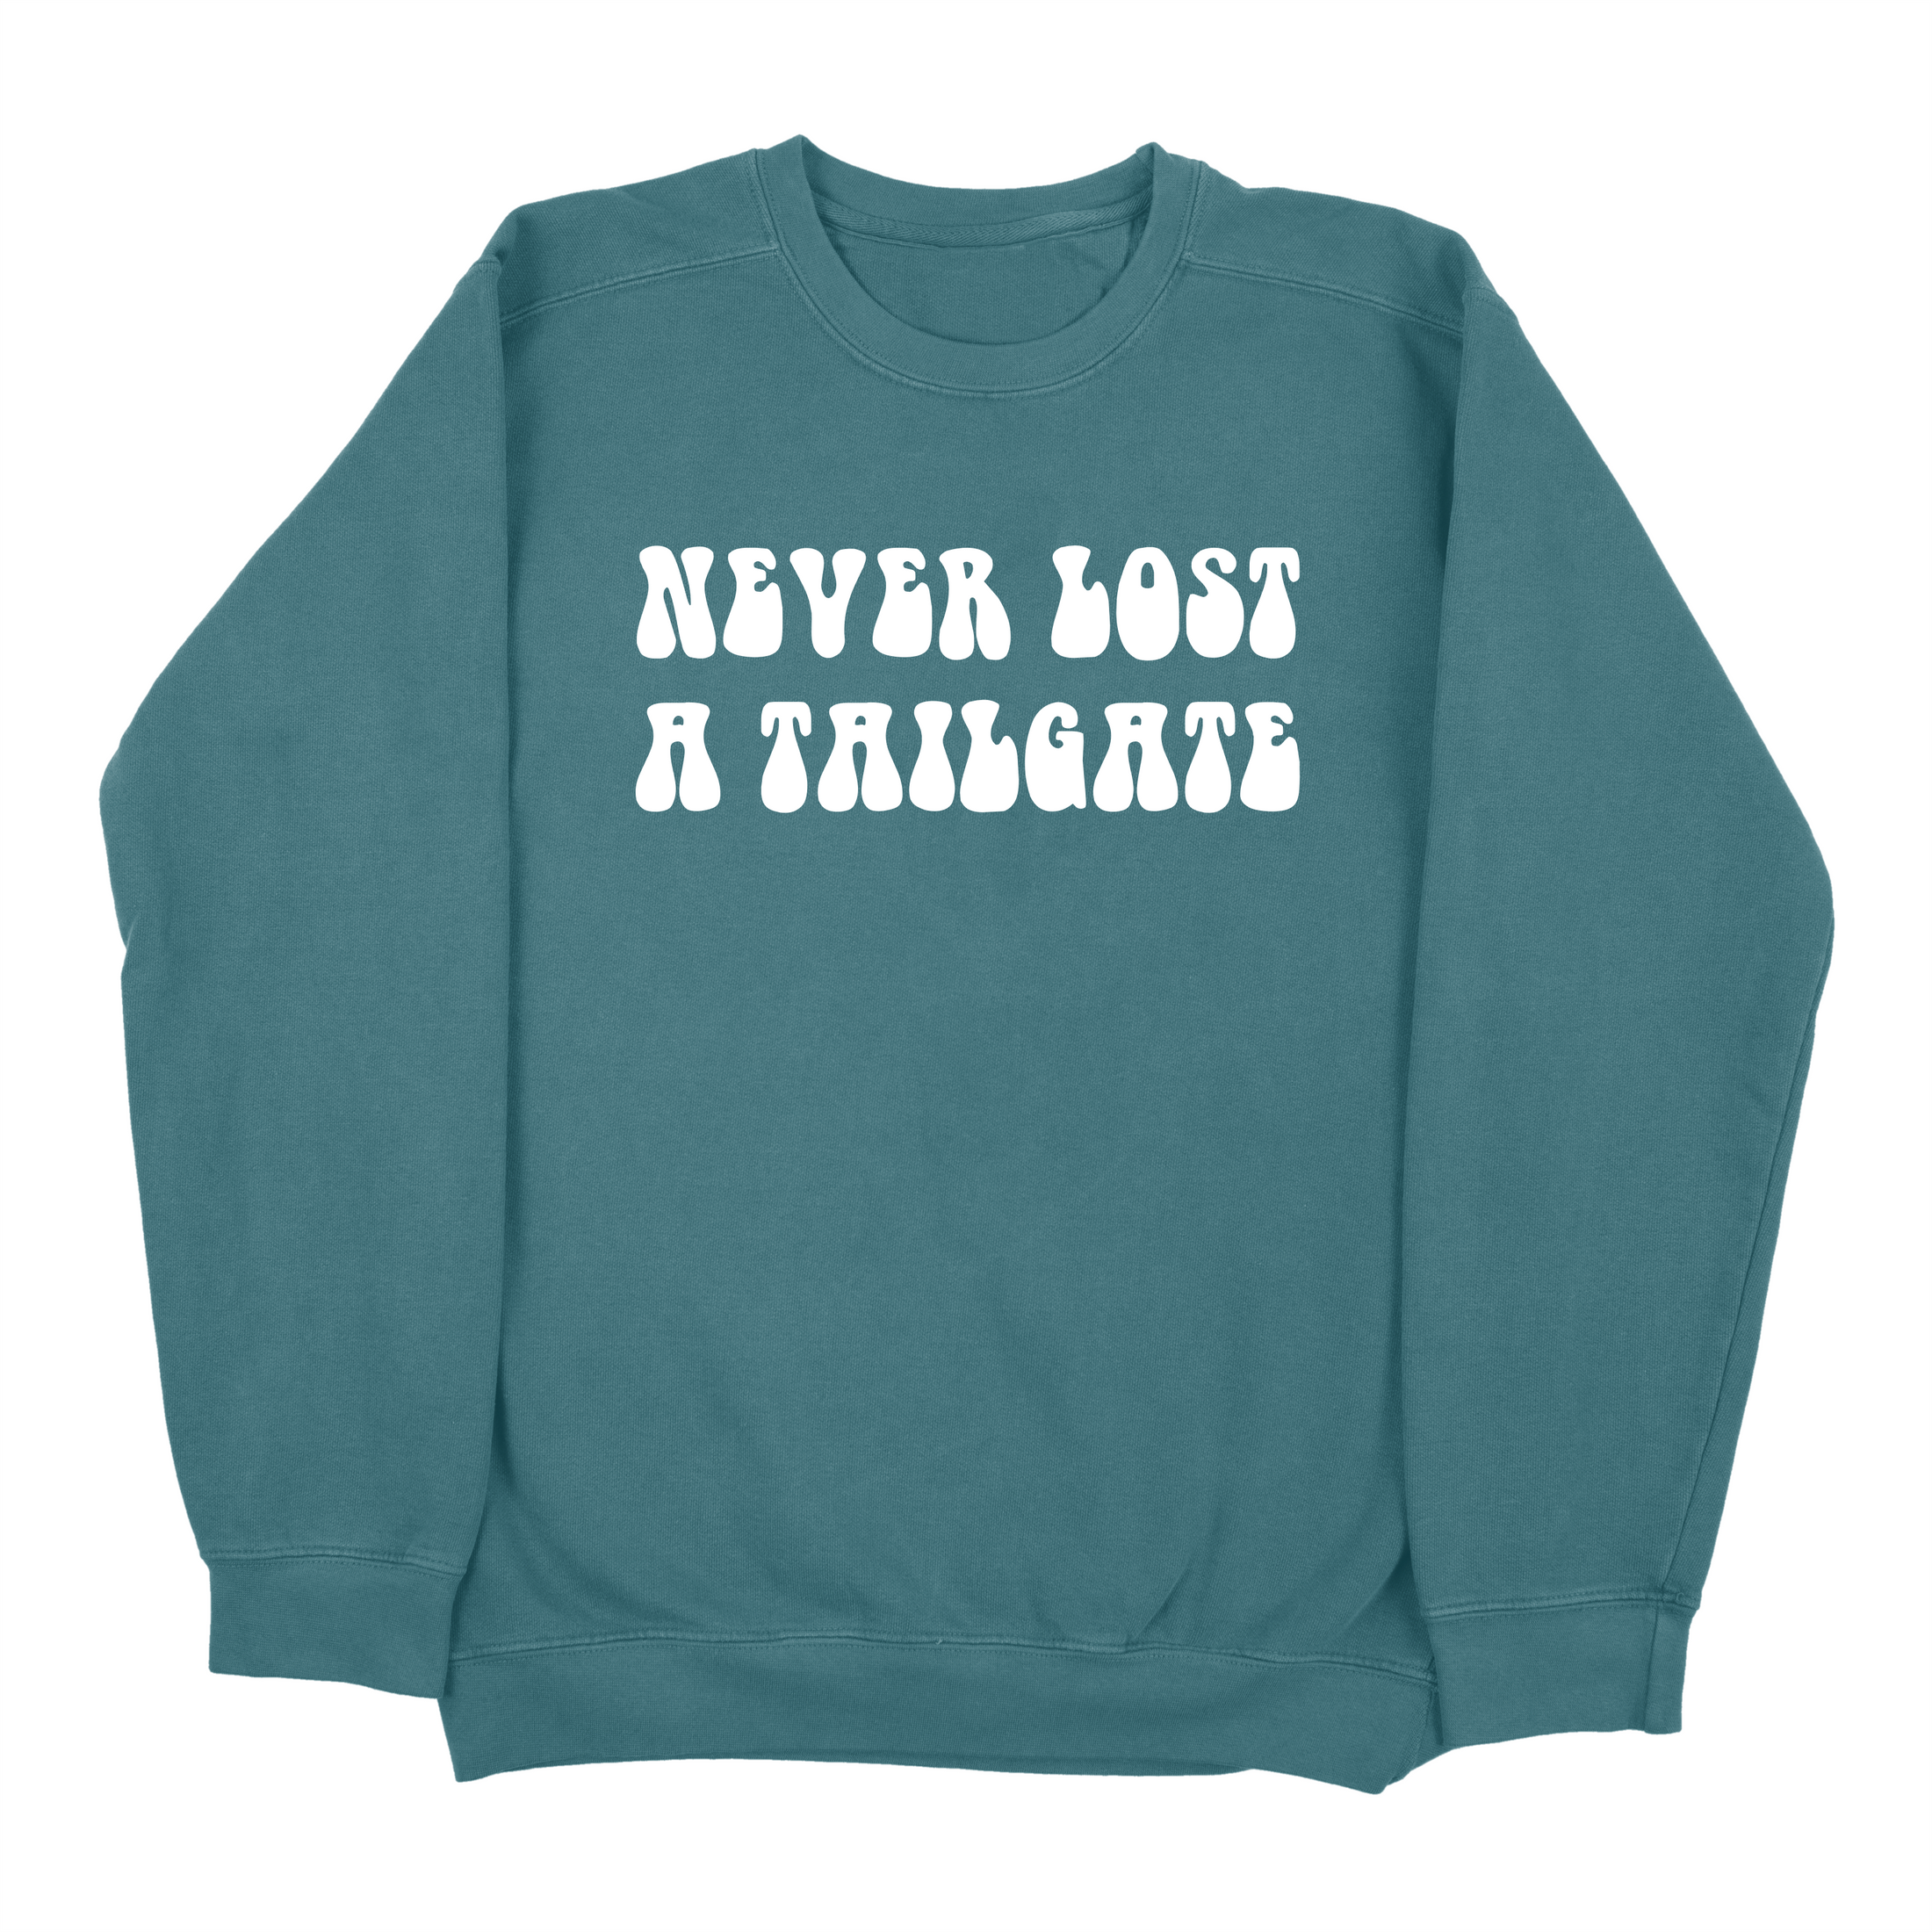 Never Lost A Tailgate Sweatshirt (Pack of 6)